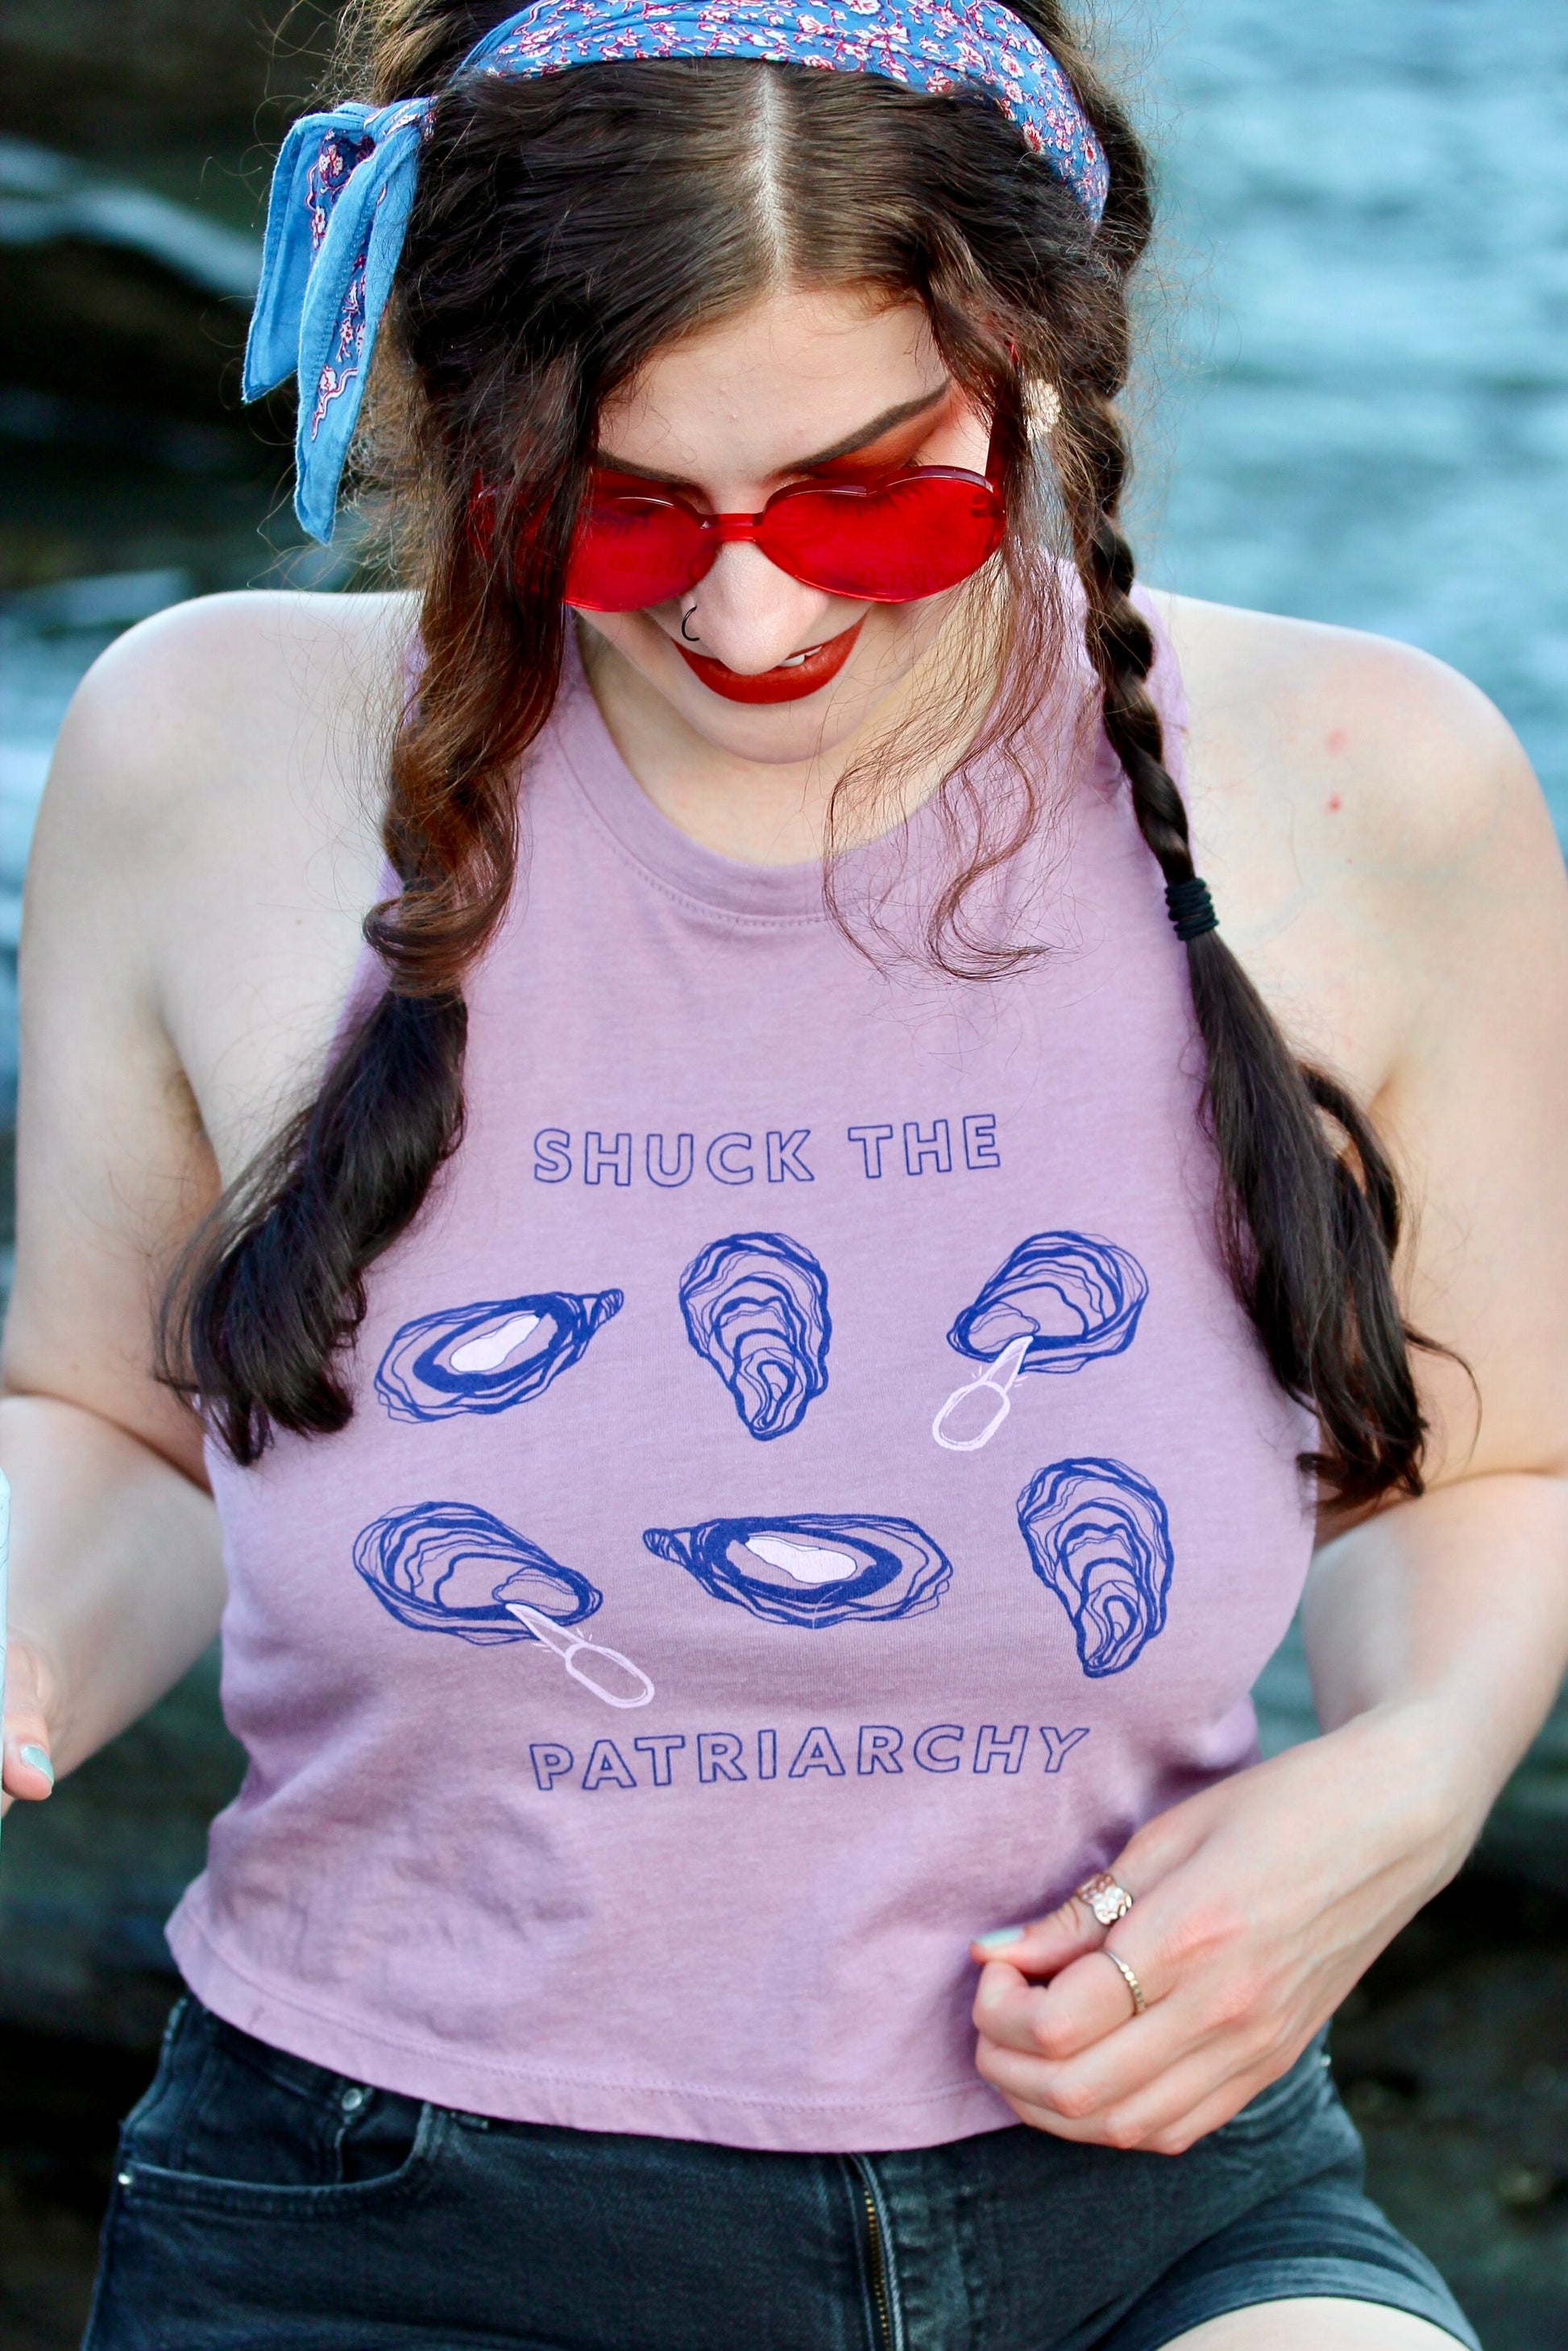 A woman wears heart-shaped sunglasses and a cropped tank that reads "Shuck the Patriarchy" 